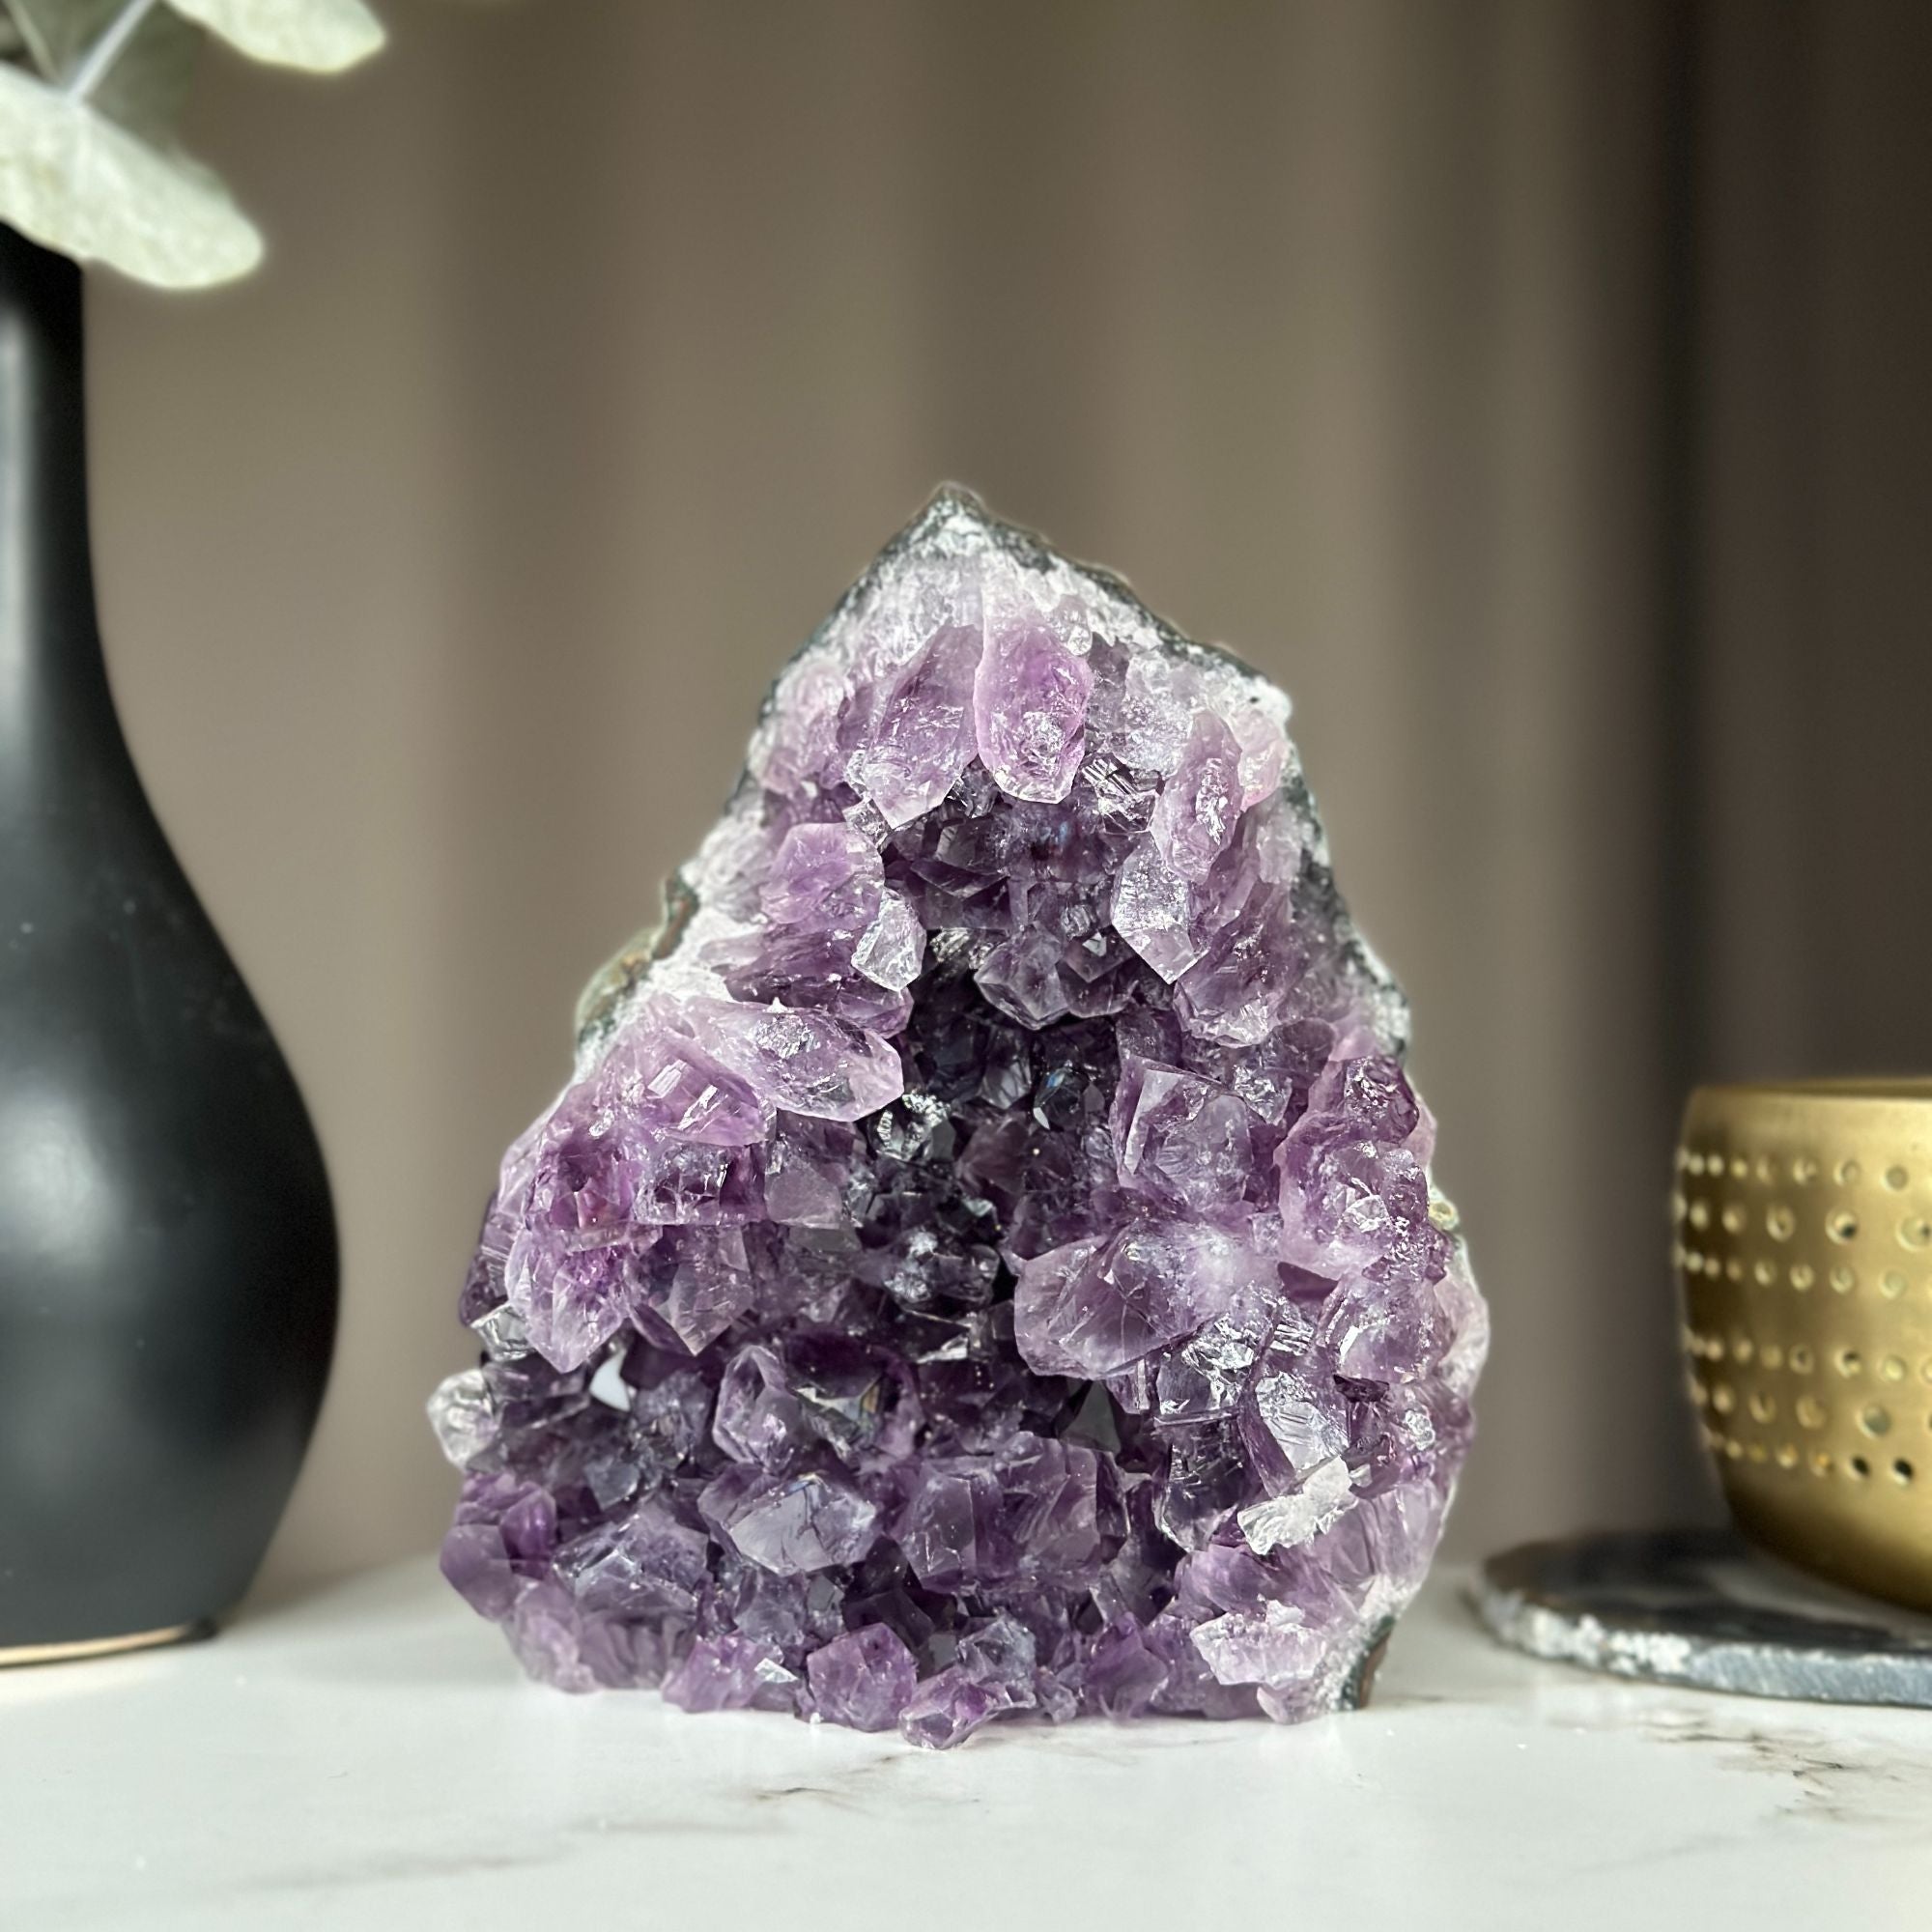 Amethyst geode cave with agate formations